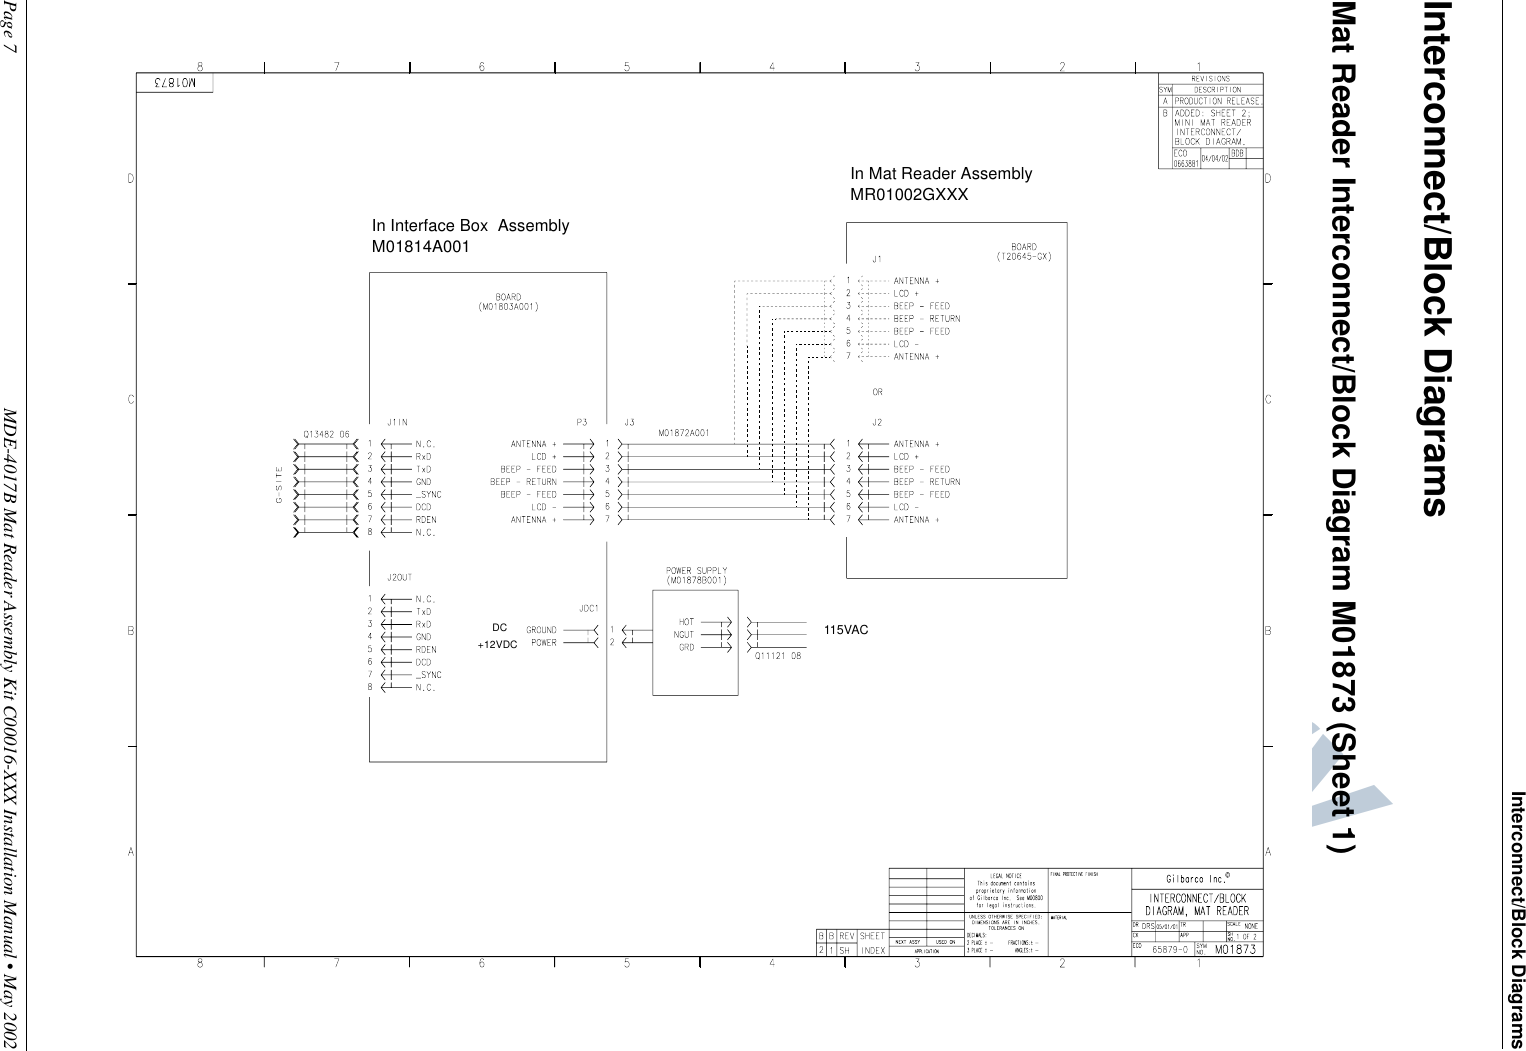 Preliminary  05/16/02Page 7 MDE-4017B Mat Reader Assembly Kit C00016-XXX Installation Manual • May 2002Interconnect/Block DiagramsInterconnect/Block DiagramsMat Reader Interconnect/Block Diagram M01873 (Sheet 1)115VAC+12VDCDCIn Mat Reader AssemblyMR01002GXXXIn Interface Box  AssemblyM01814A001